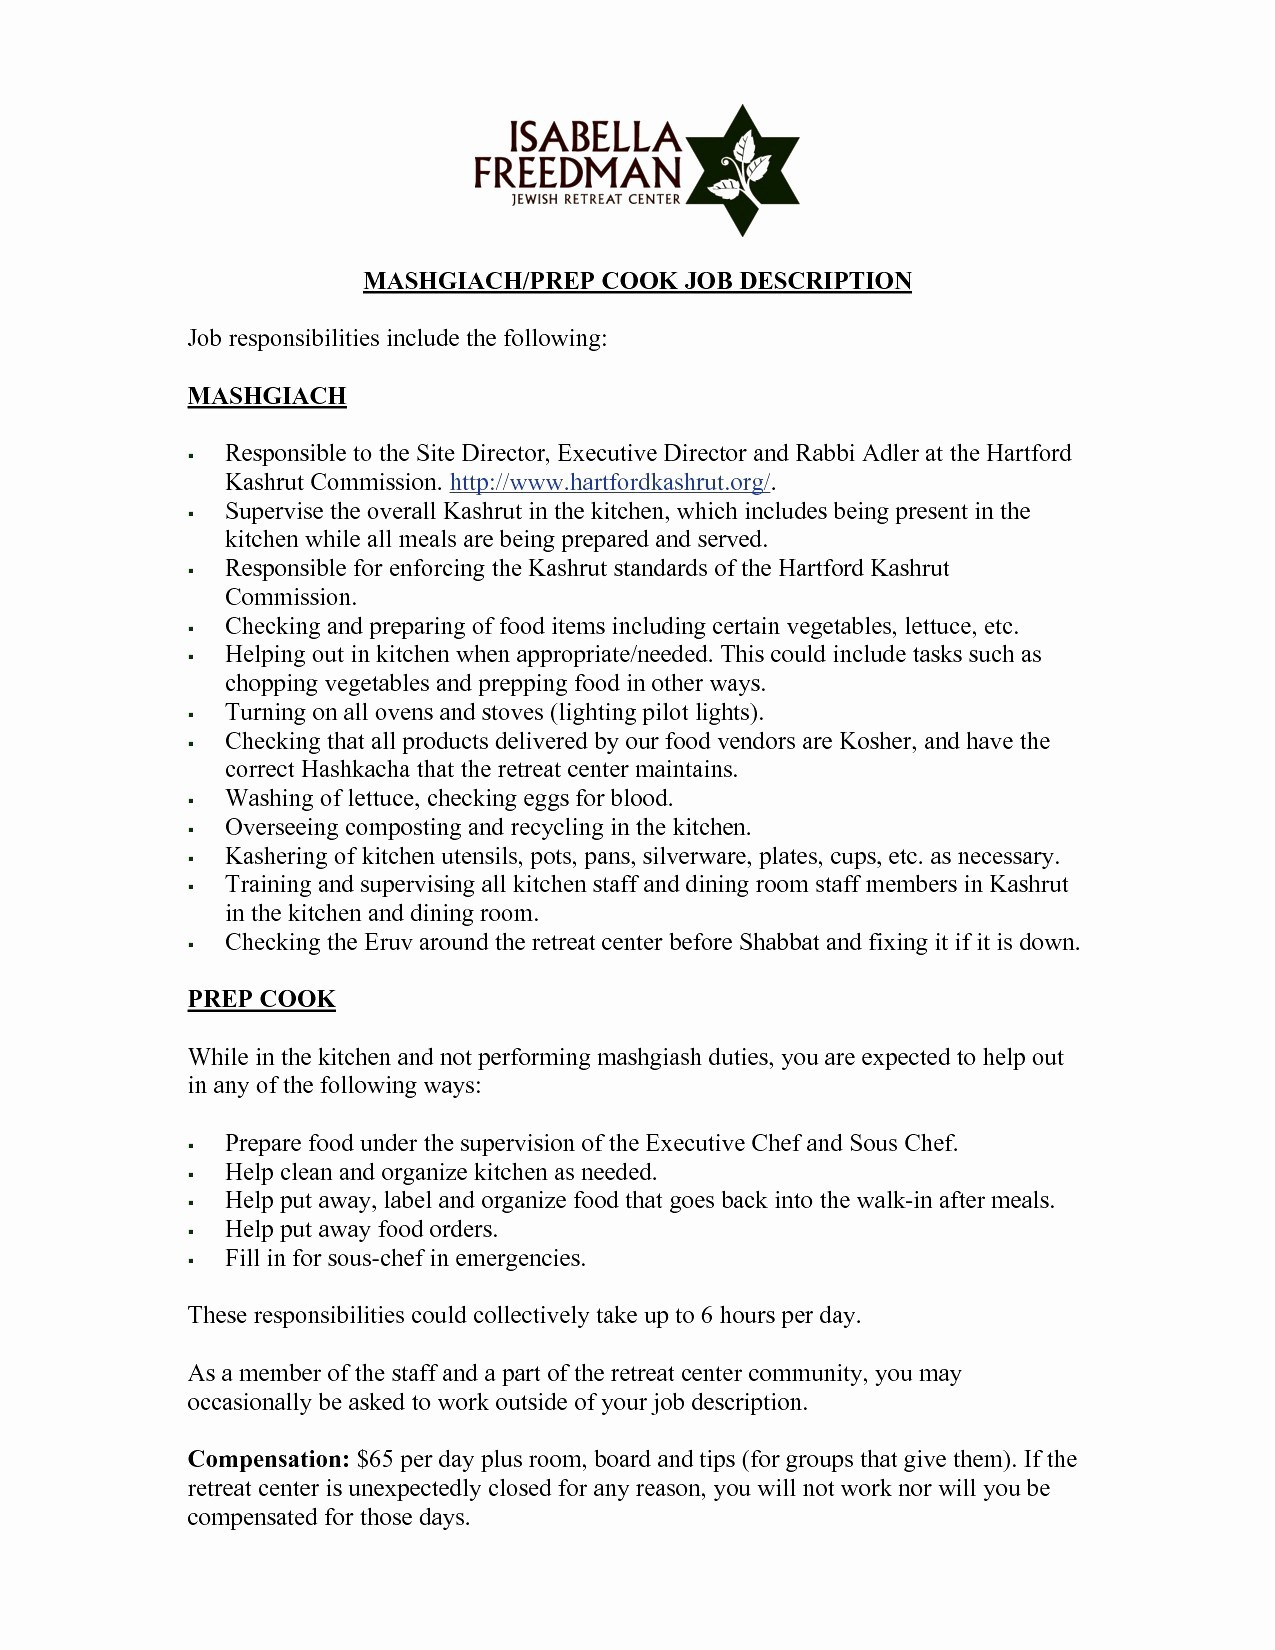 Cover Letter Template Free Google Docs - Free Resume Templates Google Docs New Luxury Cover Letter Template